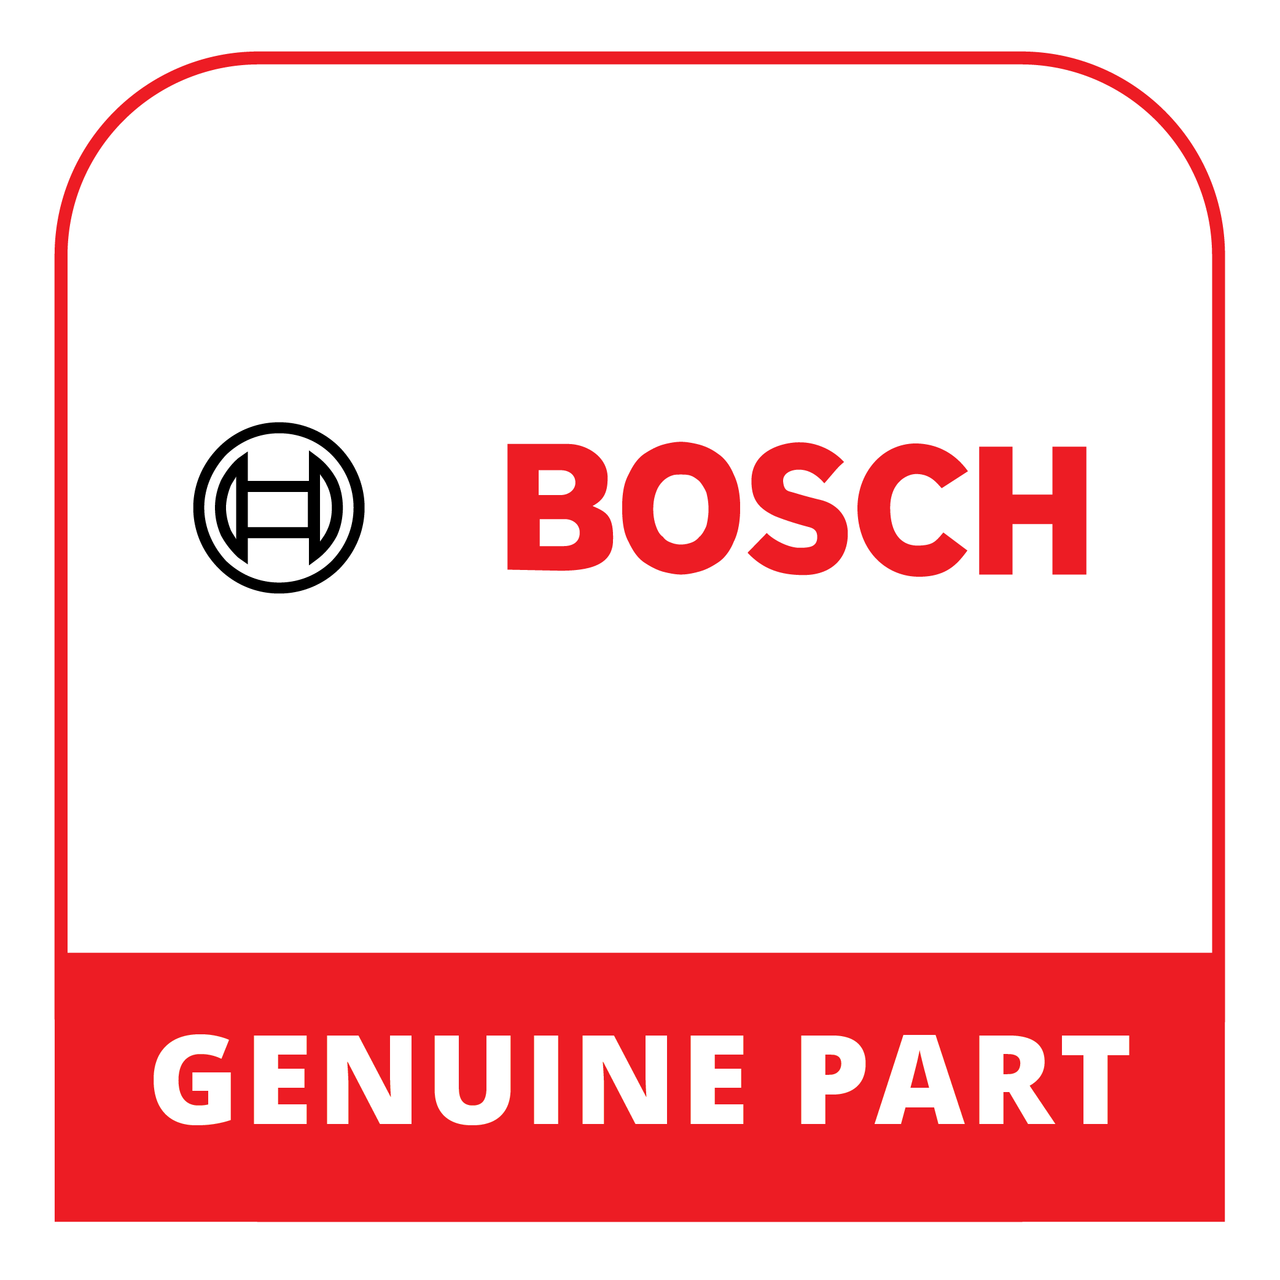 Bosch (Thermador) 11052969 - Strip - Genuine Bosch (Thermador) Part